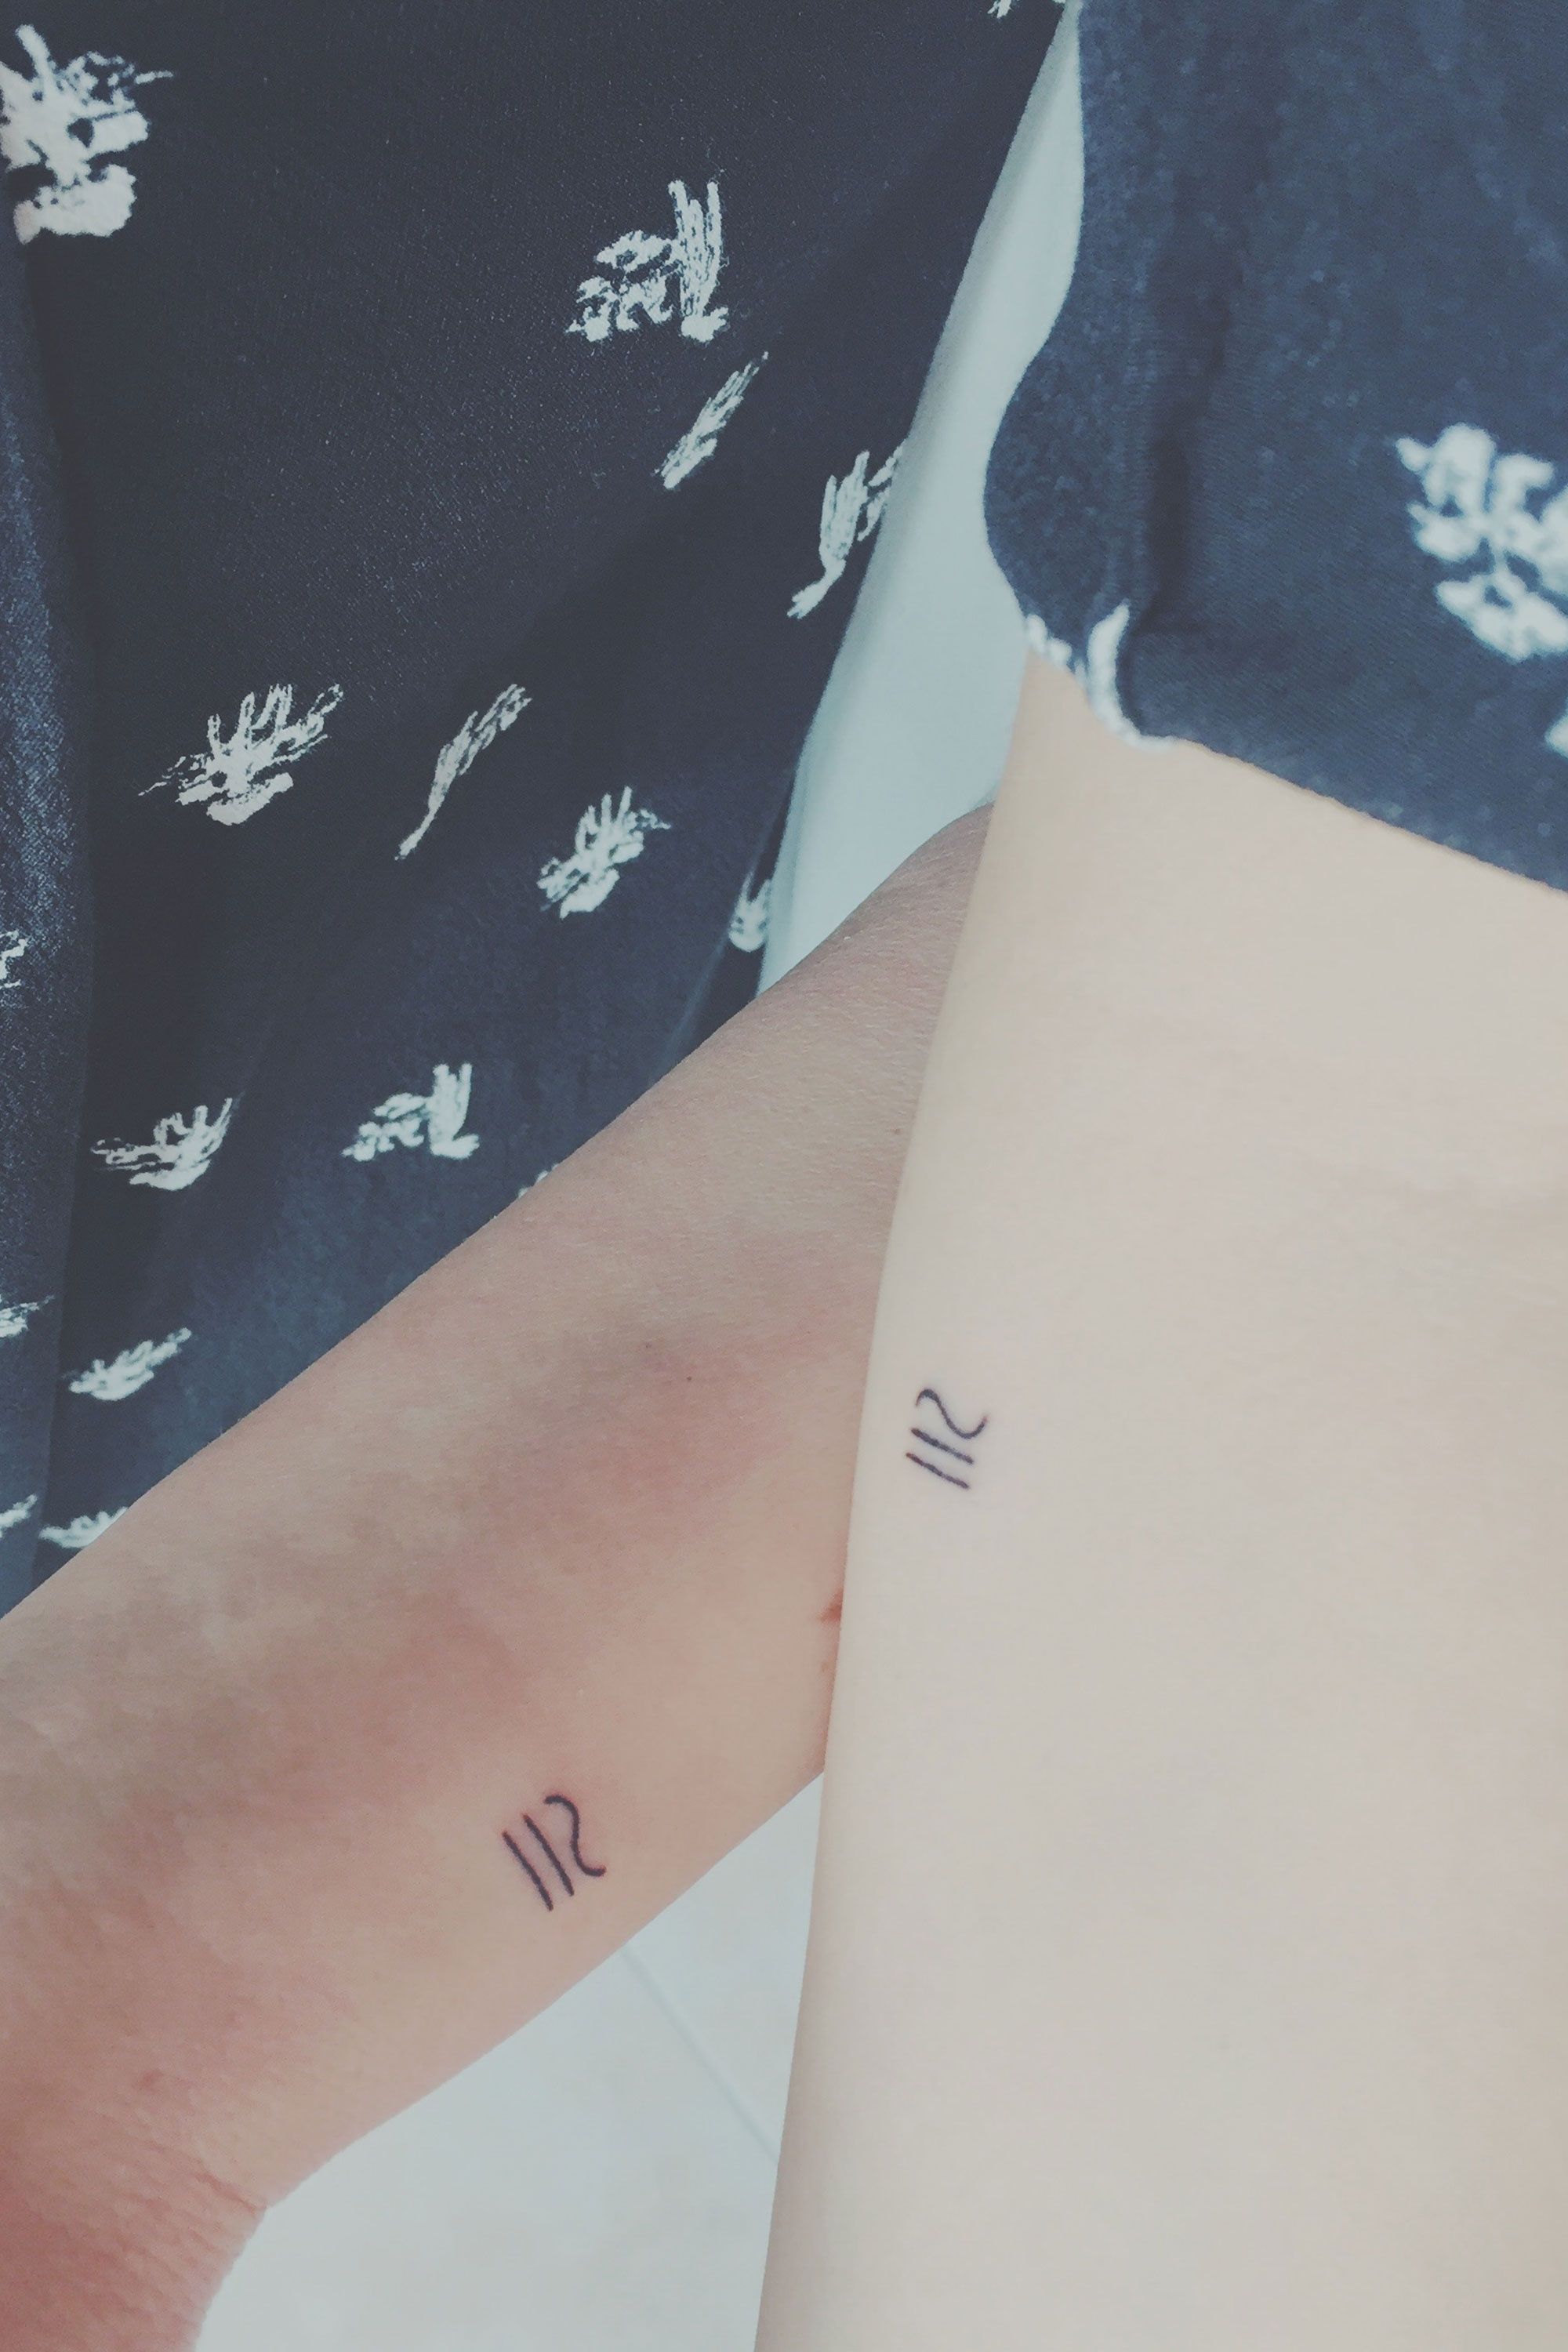 Tattoos by Ping - Minimalist Gilmore girls outline & “in omnia paratus” 🖤  Thanks Jenna! Don't forget, you can enter my tattoo raffle until midnight  on November 15!✨ Link to post with